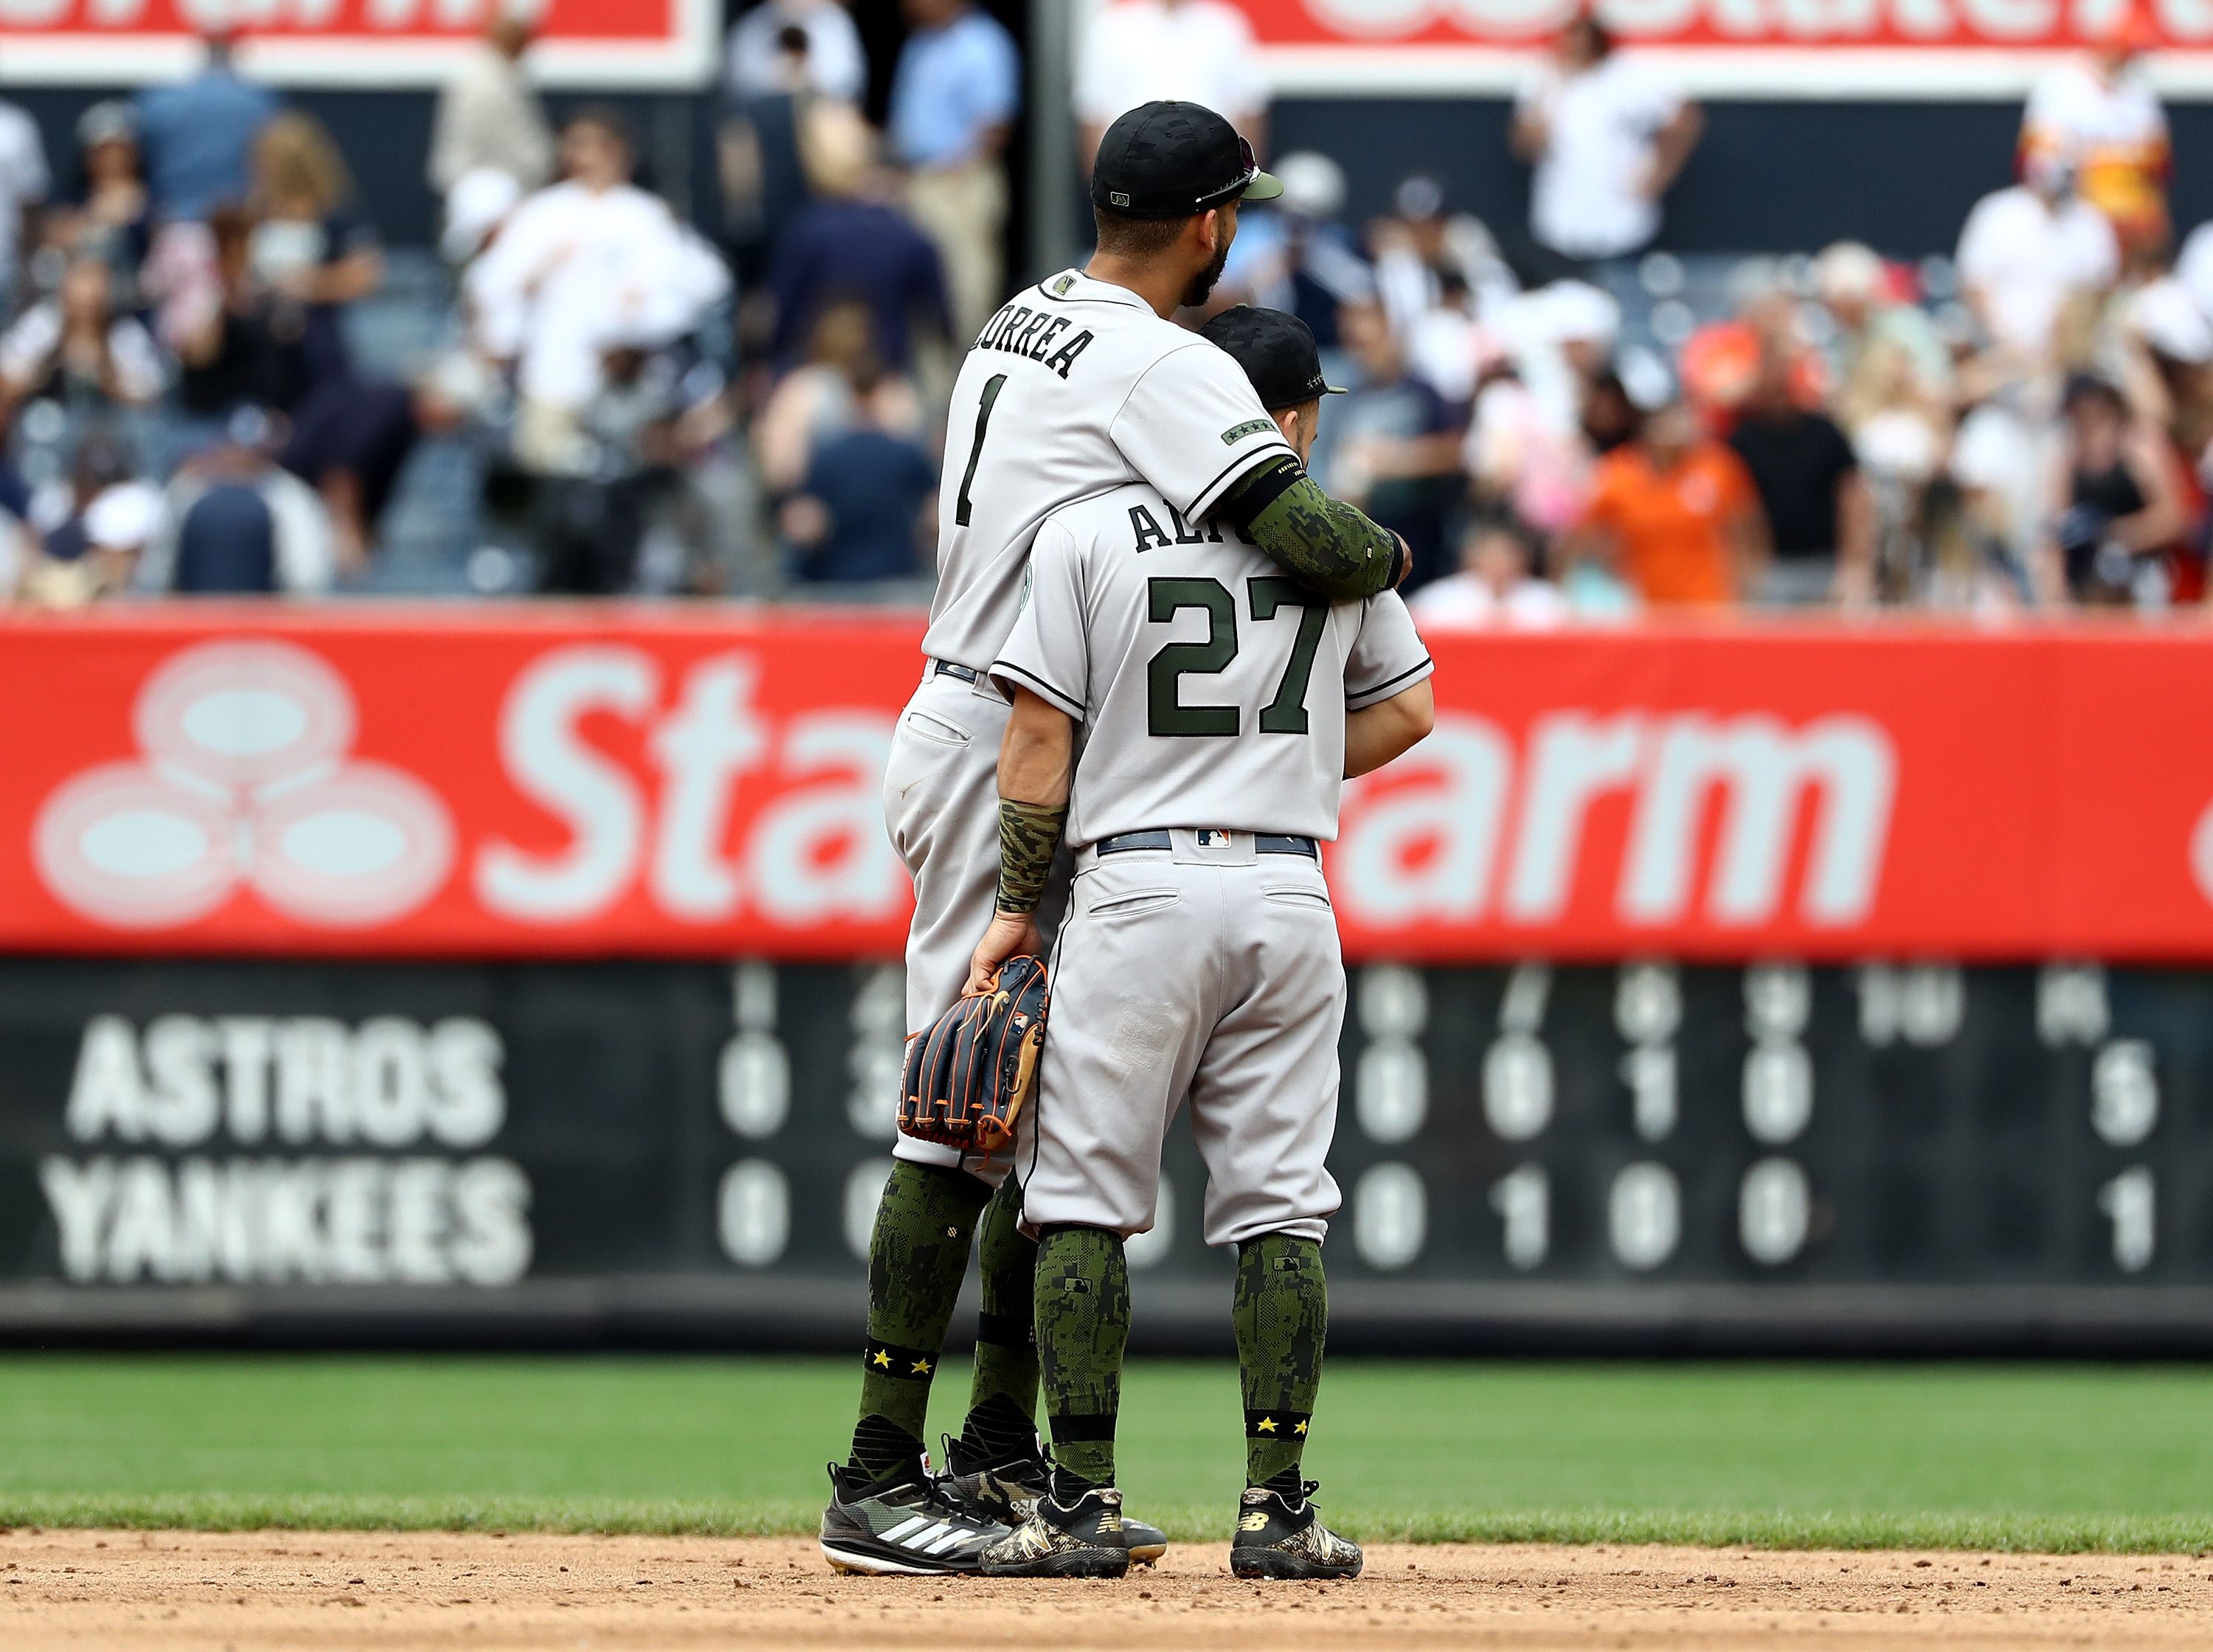 Jose Altuve vs Aaron Judge Height: How the 13-inch height difference  between towering Yankees star and diminutive Astros hero created an iconic  meme